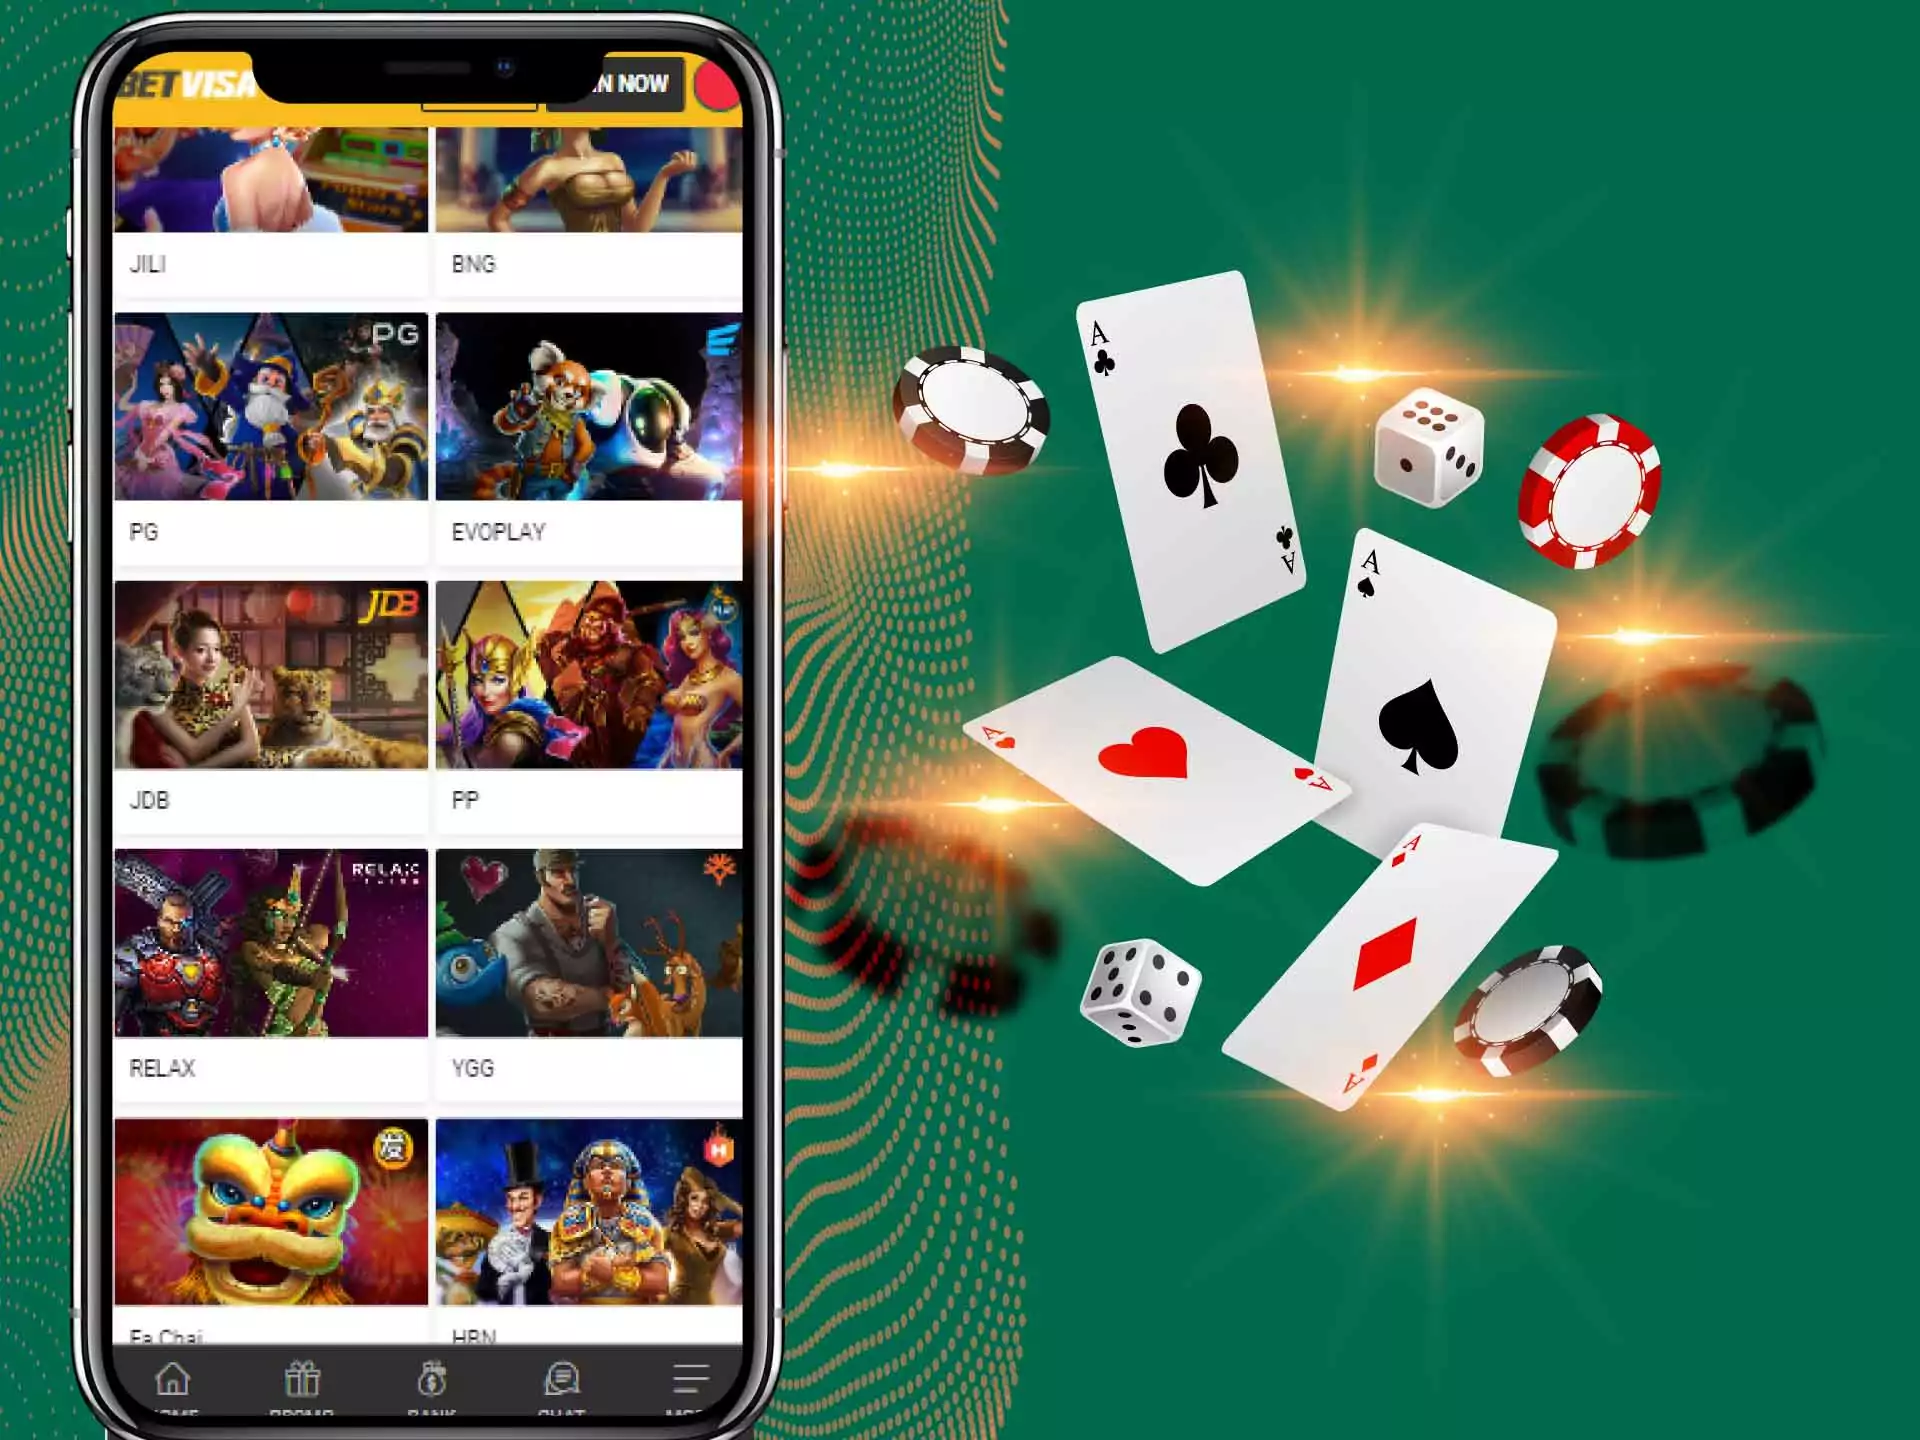 Try to collect 21 points and win the blackjack games.